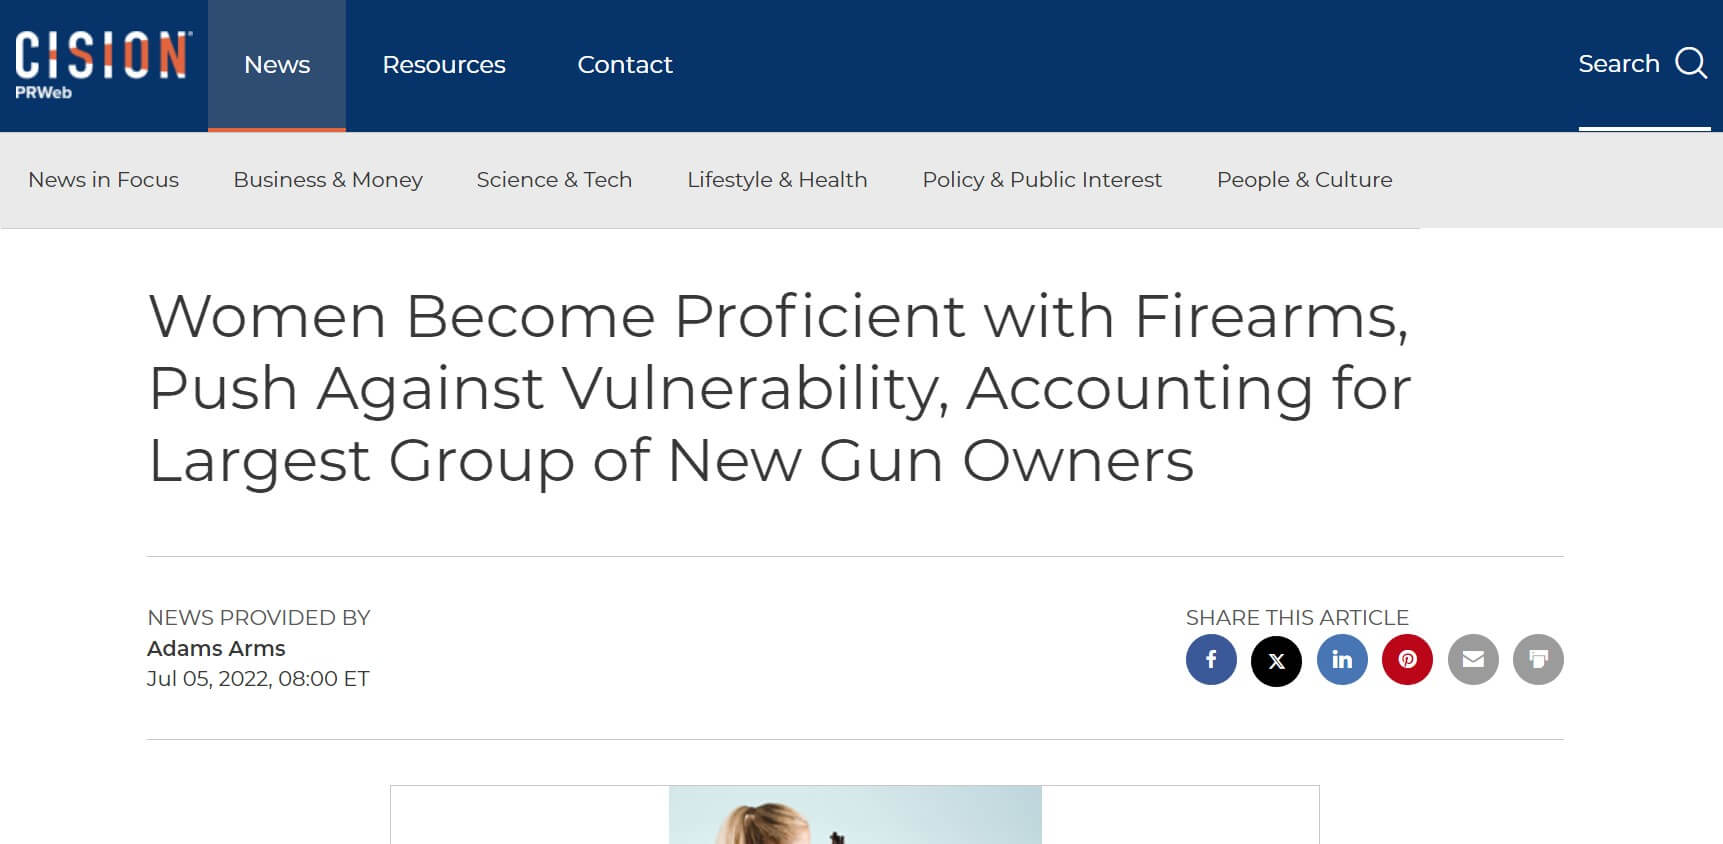 Cision news article: "Women Becom Proficient with Firearms, Push Against Vulnerability, Accounting for Largest Group of New Gun Owners"